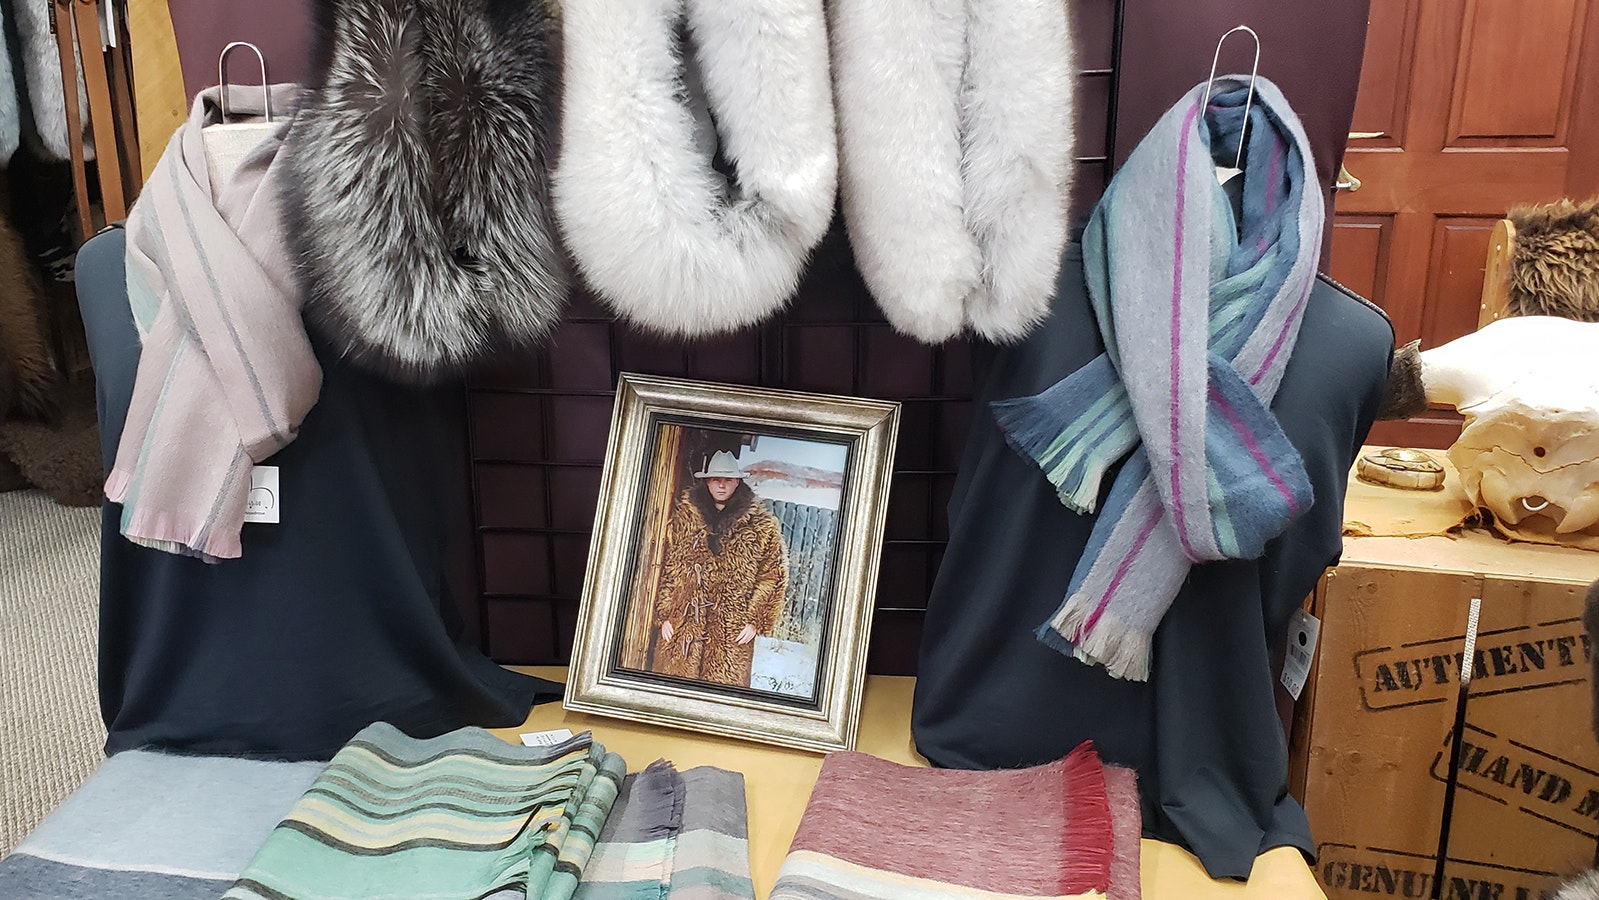 One of the coats for "The Hateful Eight" is pictured.